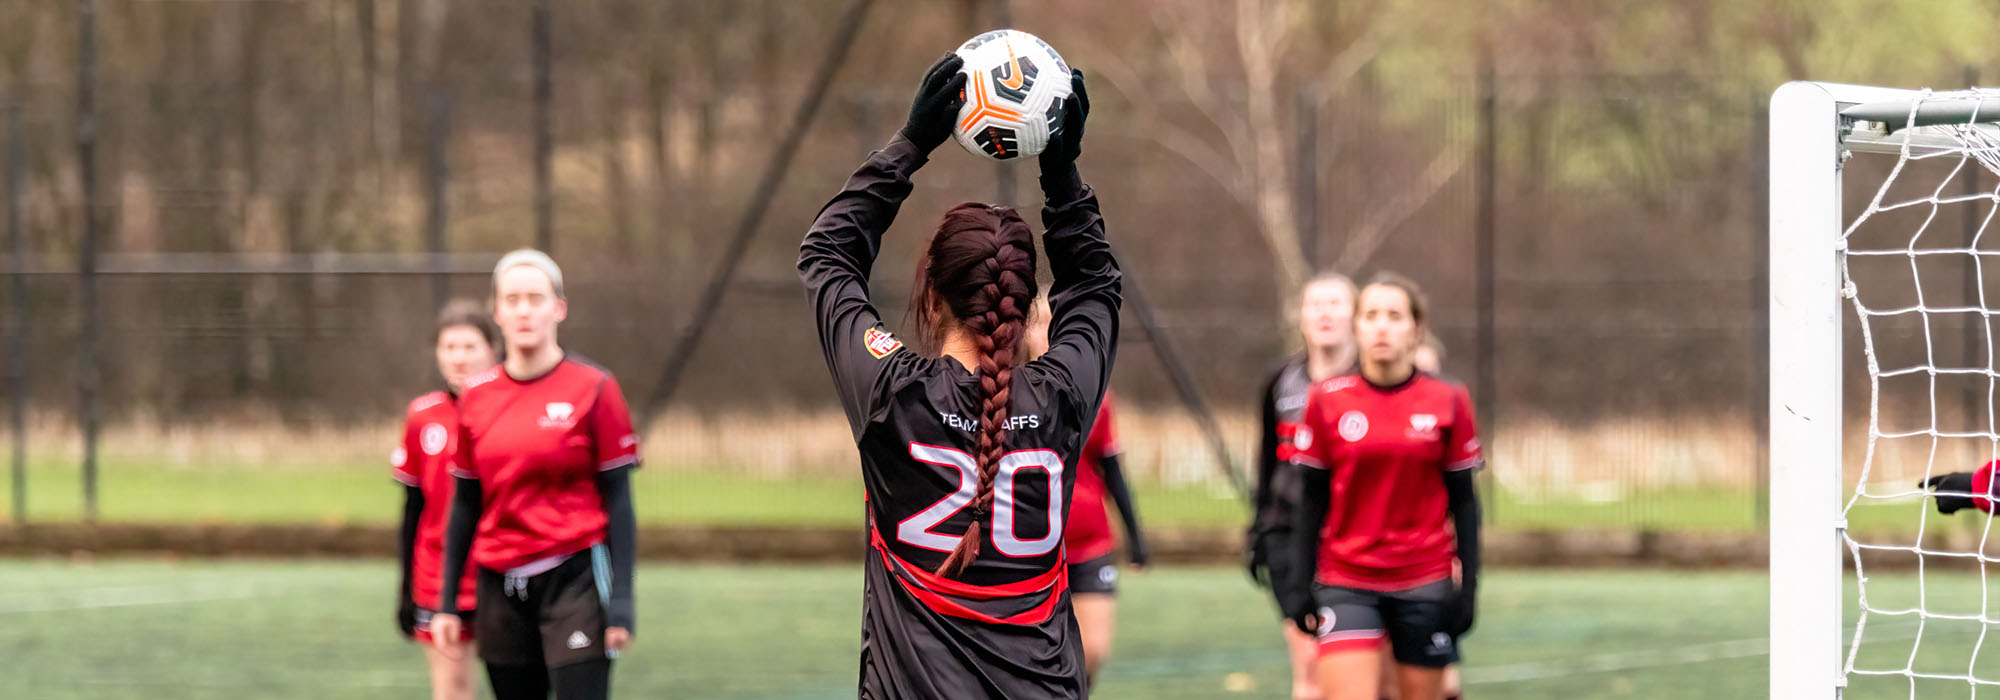 Staffs women's football player is standing on the side of the pitch and holds the ball above her head for a throw in. She has long hair in a plait and wears the Team Staffs kit.